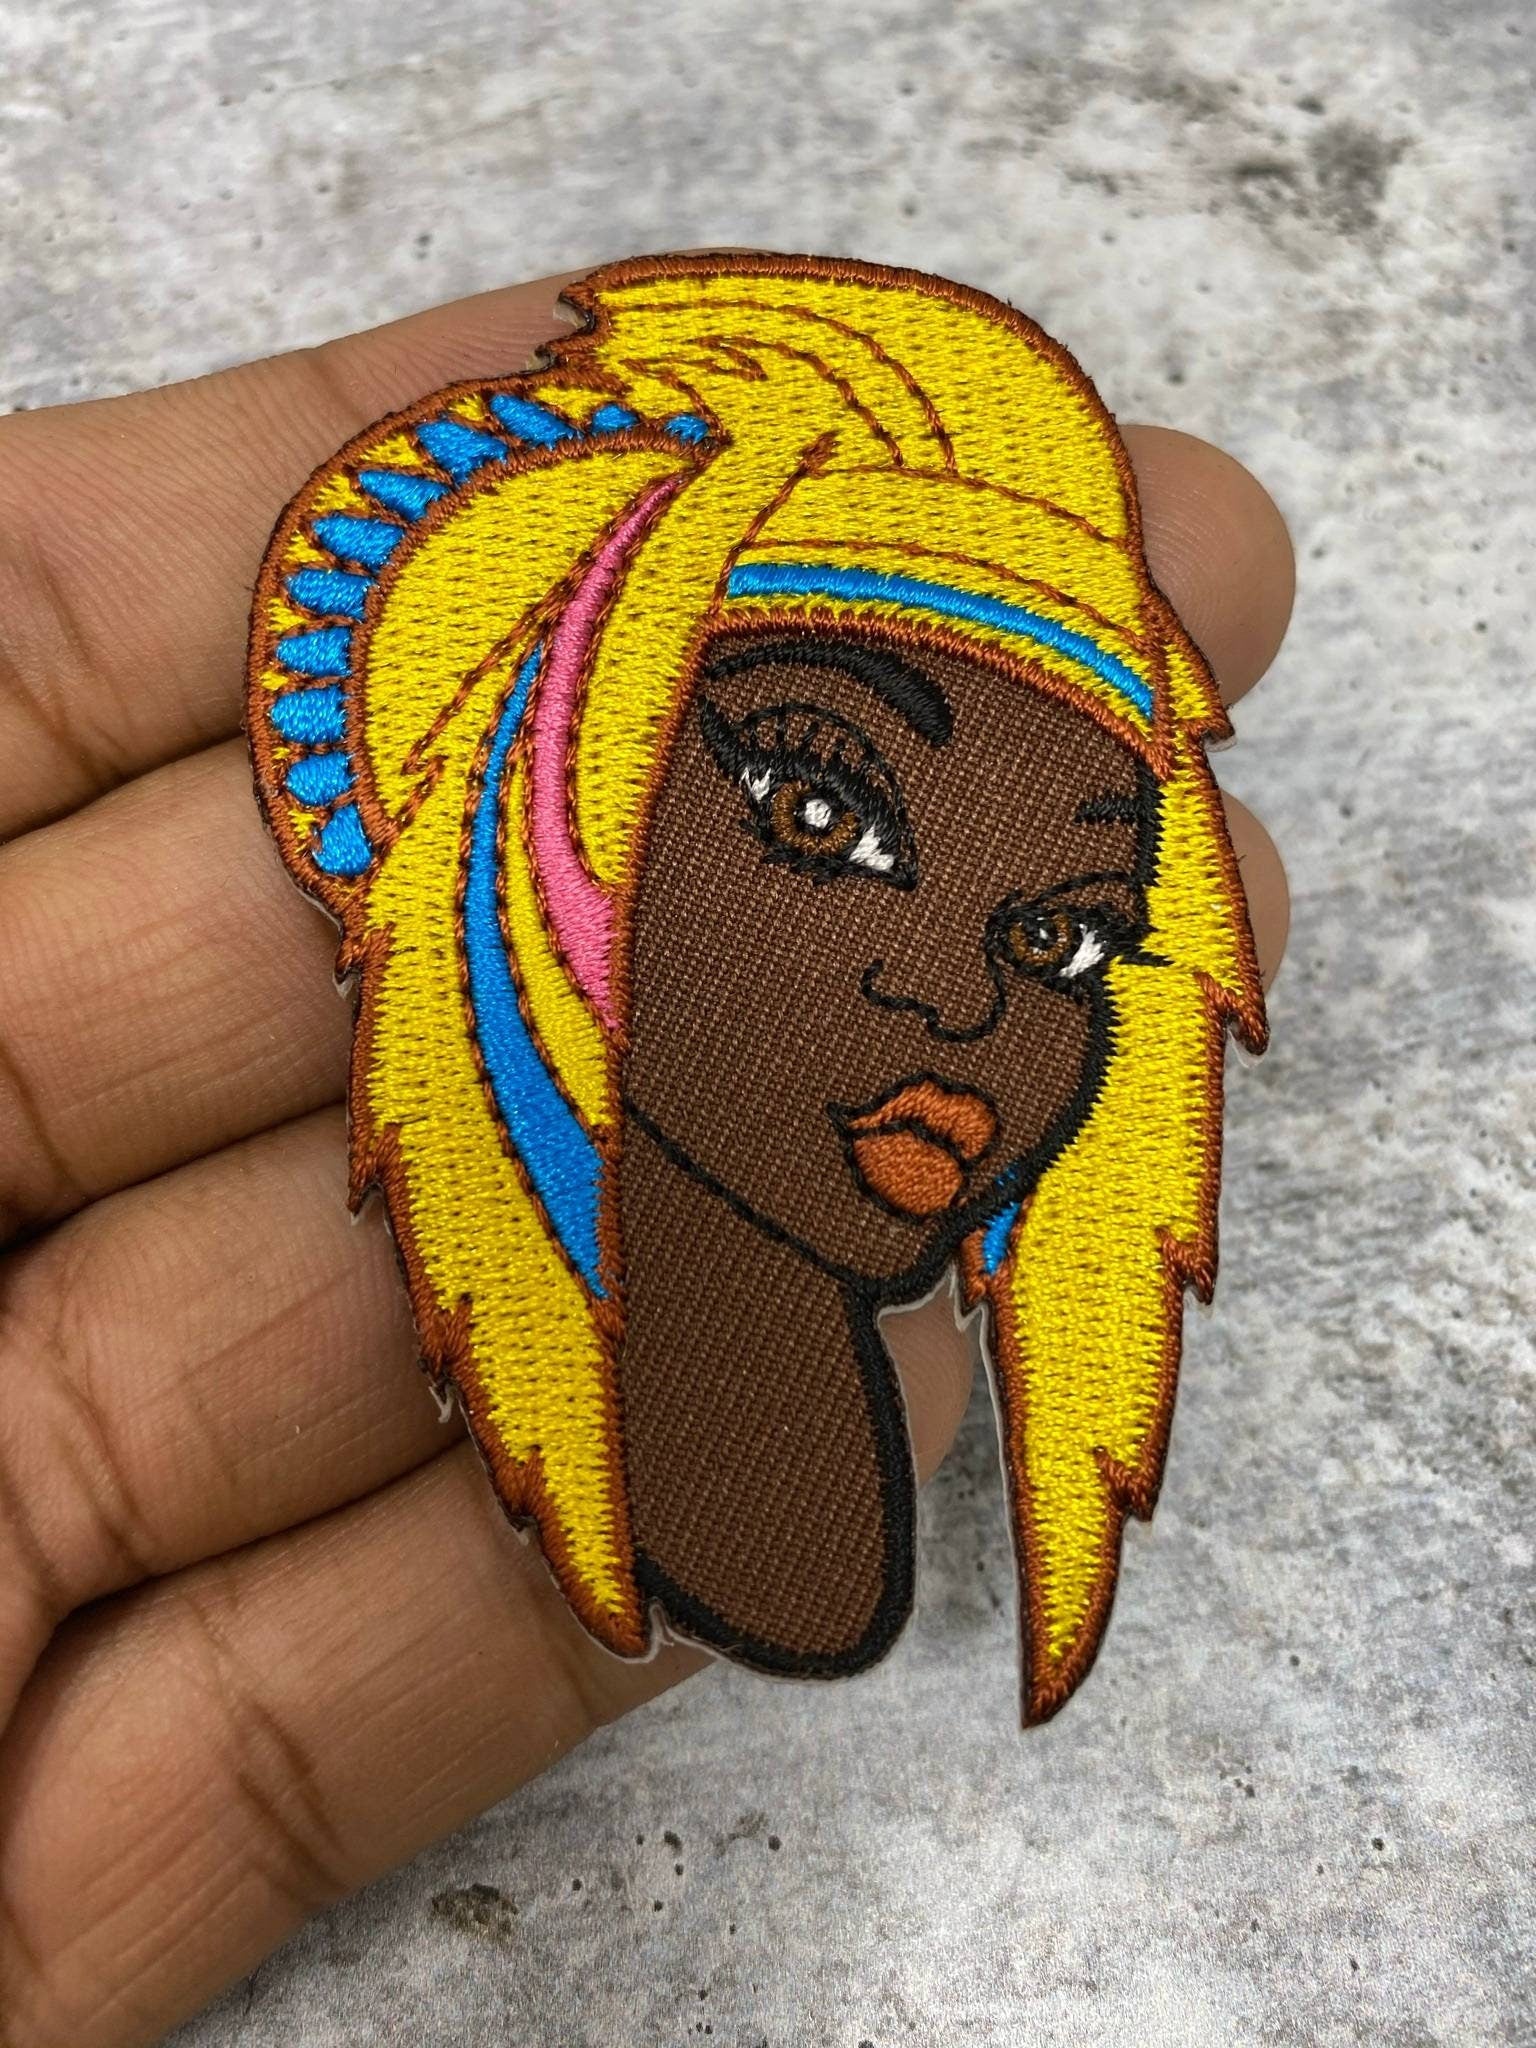 Cute, "Warrior Princess" With Head Gear, Yellow, Blue, Pink Hair, Size 3" iron-on; Black Girl Magic Patch, Small Patch for Crocs & Clothes